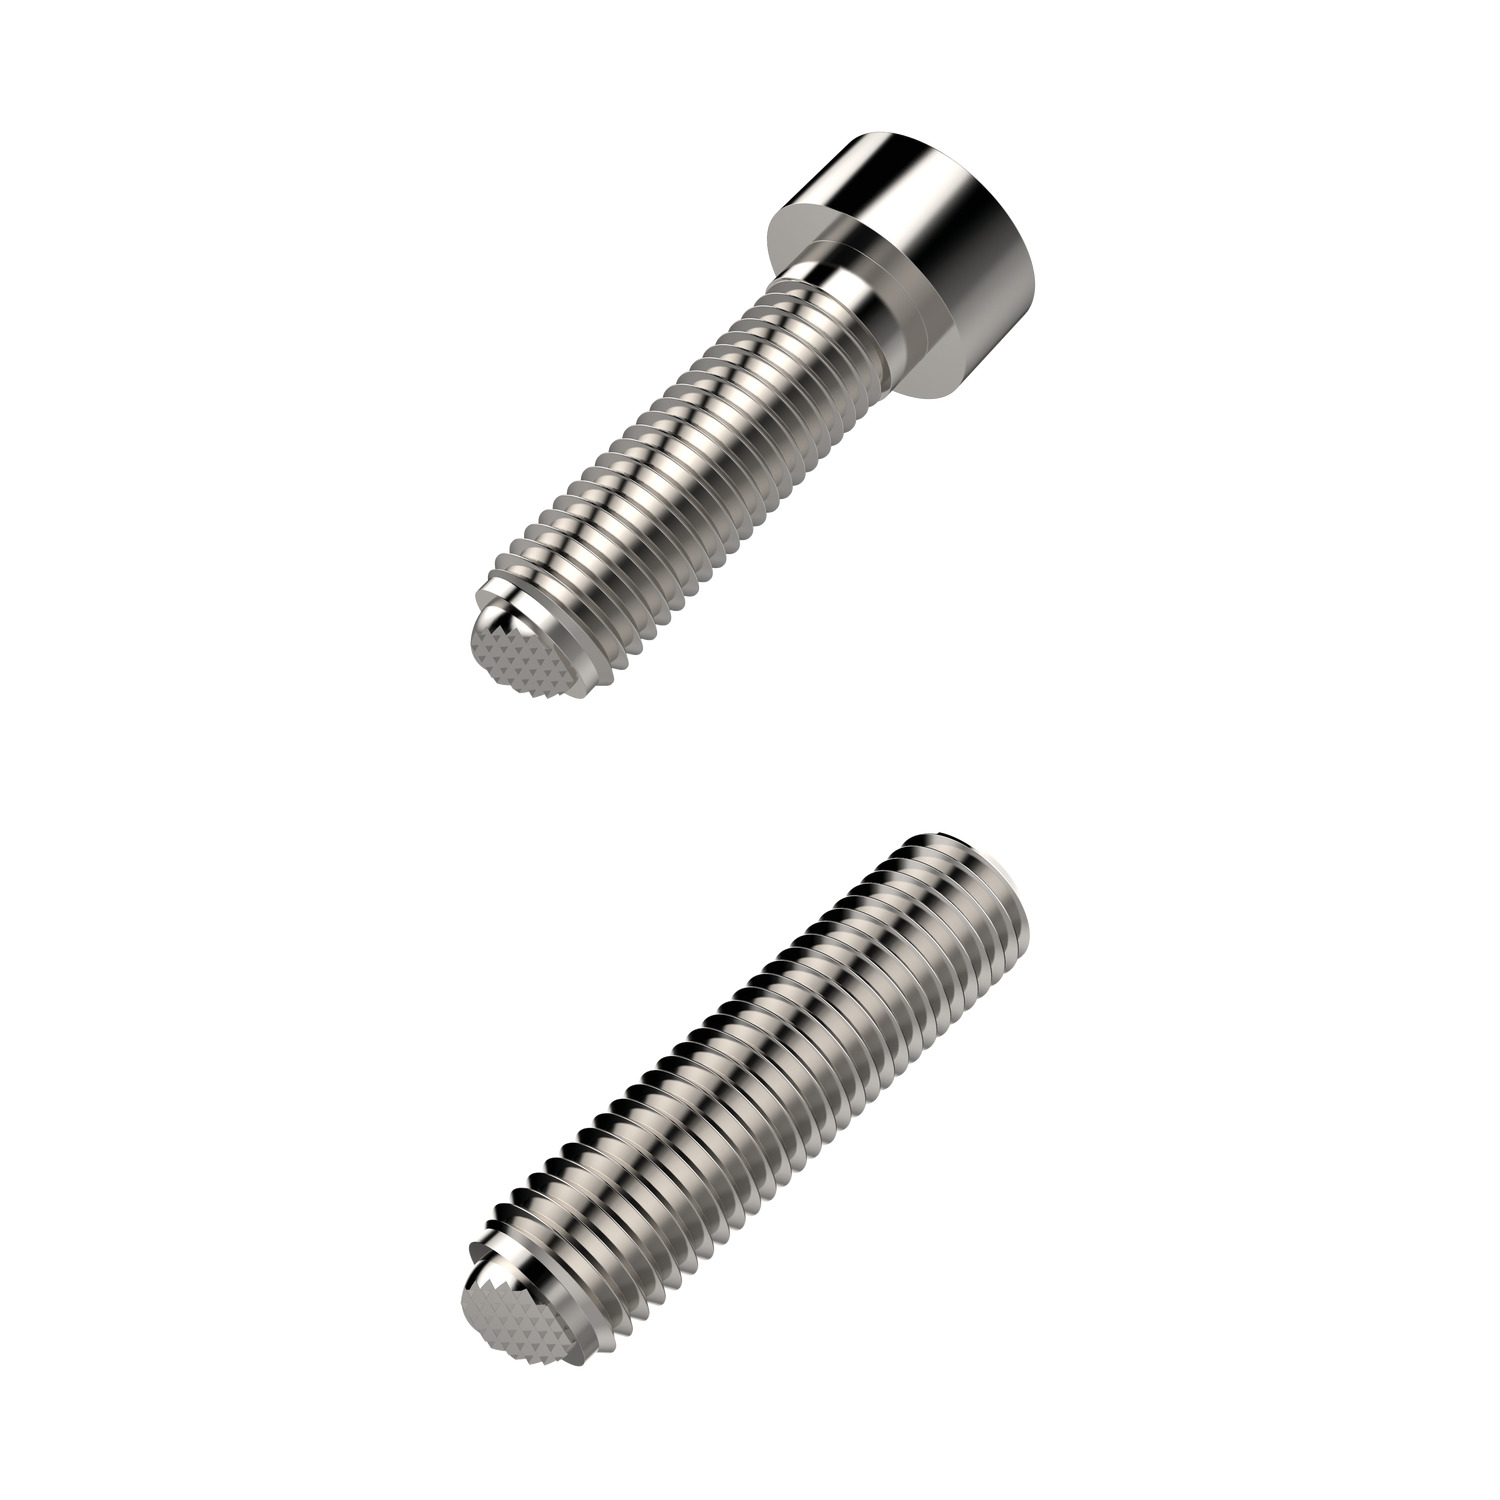 Product 34002, Thrust Screws - Stainless ball ended - flat - metal - secured / 